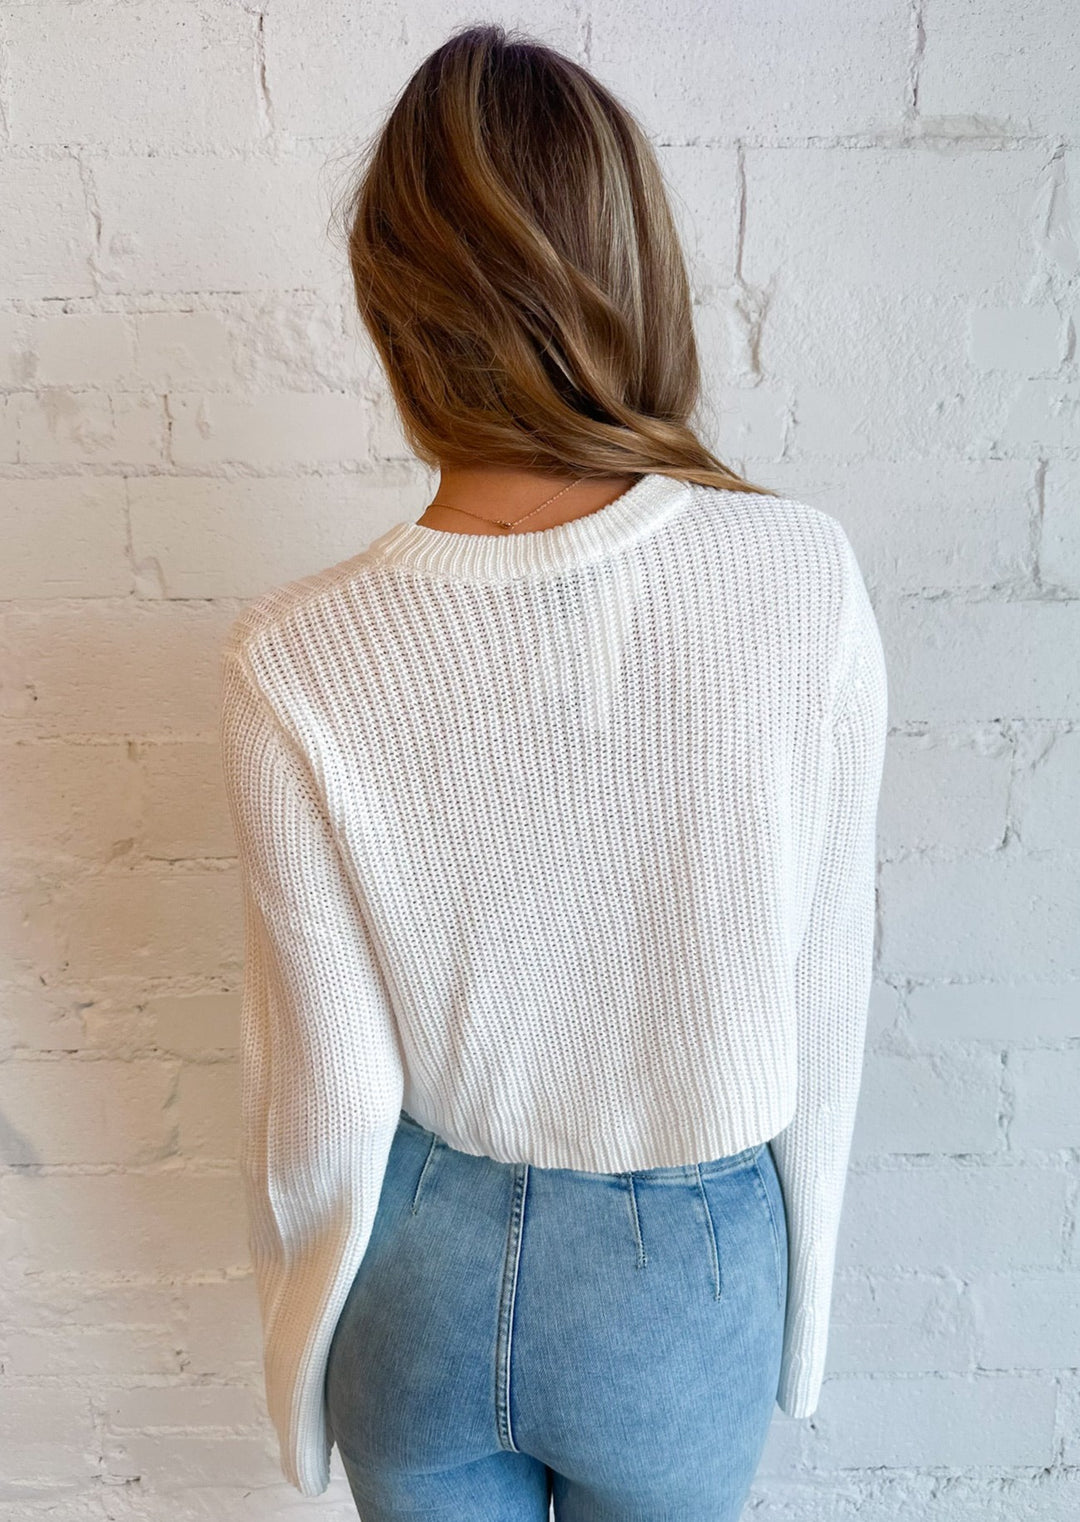 Finley Sweater, Tops, Adeline, Adeline, dallas boutique, dallas texas, texas boutique, women's boutique dallas, adeline boutique, dallas boutique, trendy boutique, affordable boutique